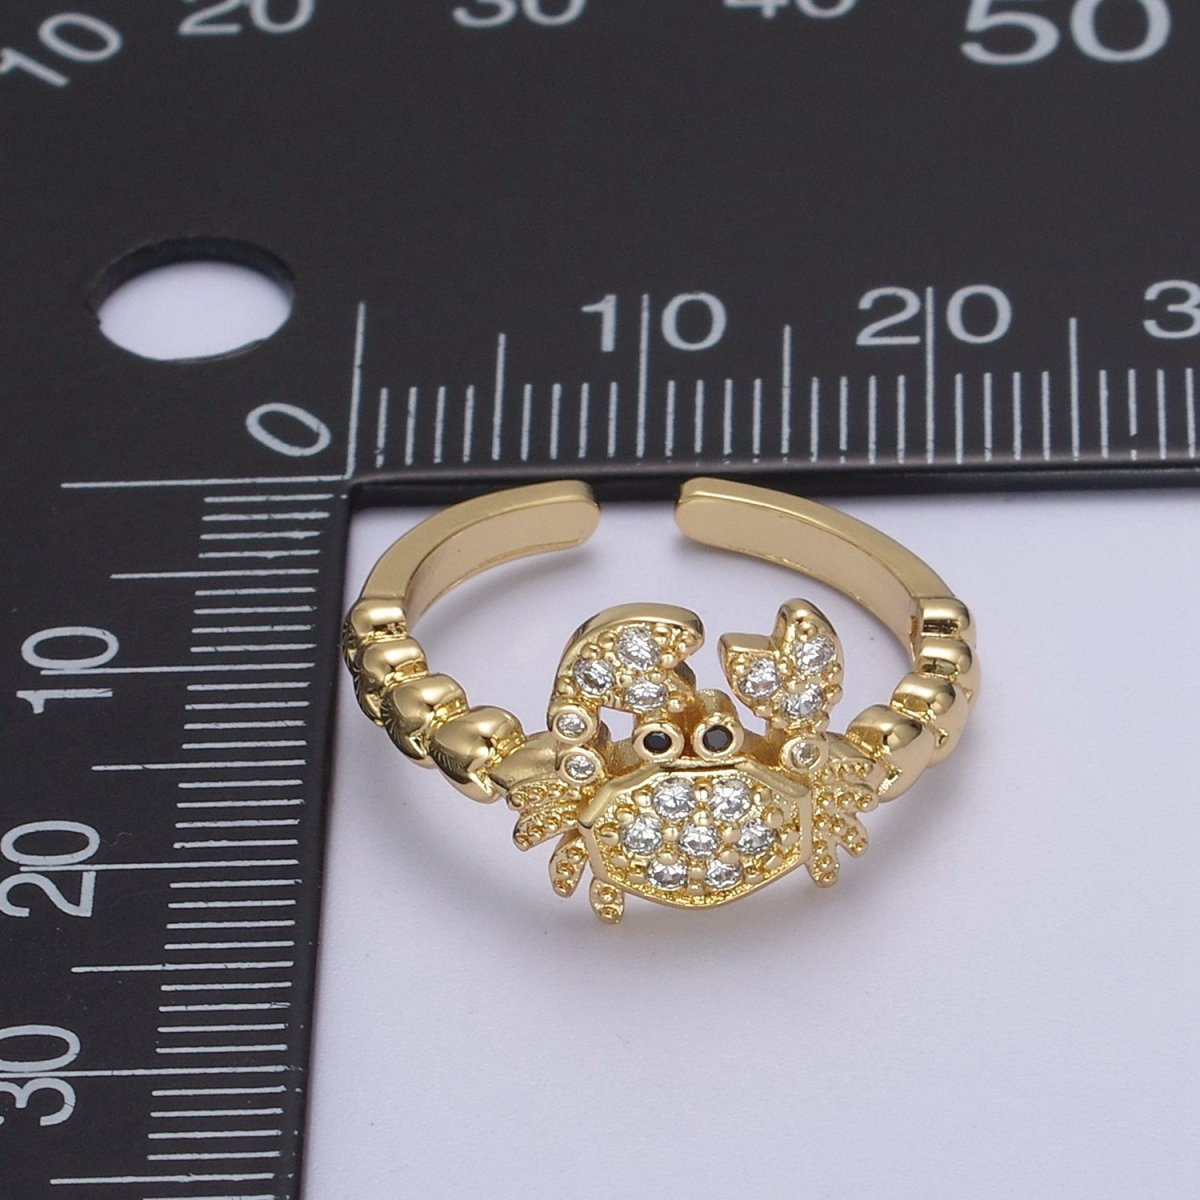 Micro Pave Cute Crab Ring, Heart Textured Gold Adjustable Band Ring, 24K Gold Filled Nature Ocean Wildlife Under The Sea Ring U-440 - DLUXCA